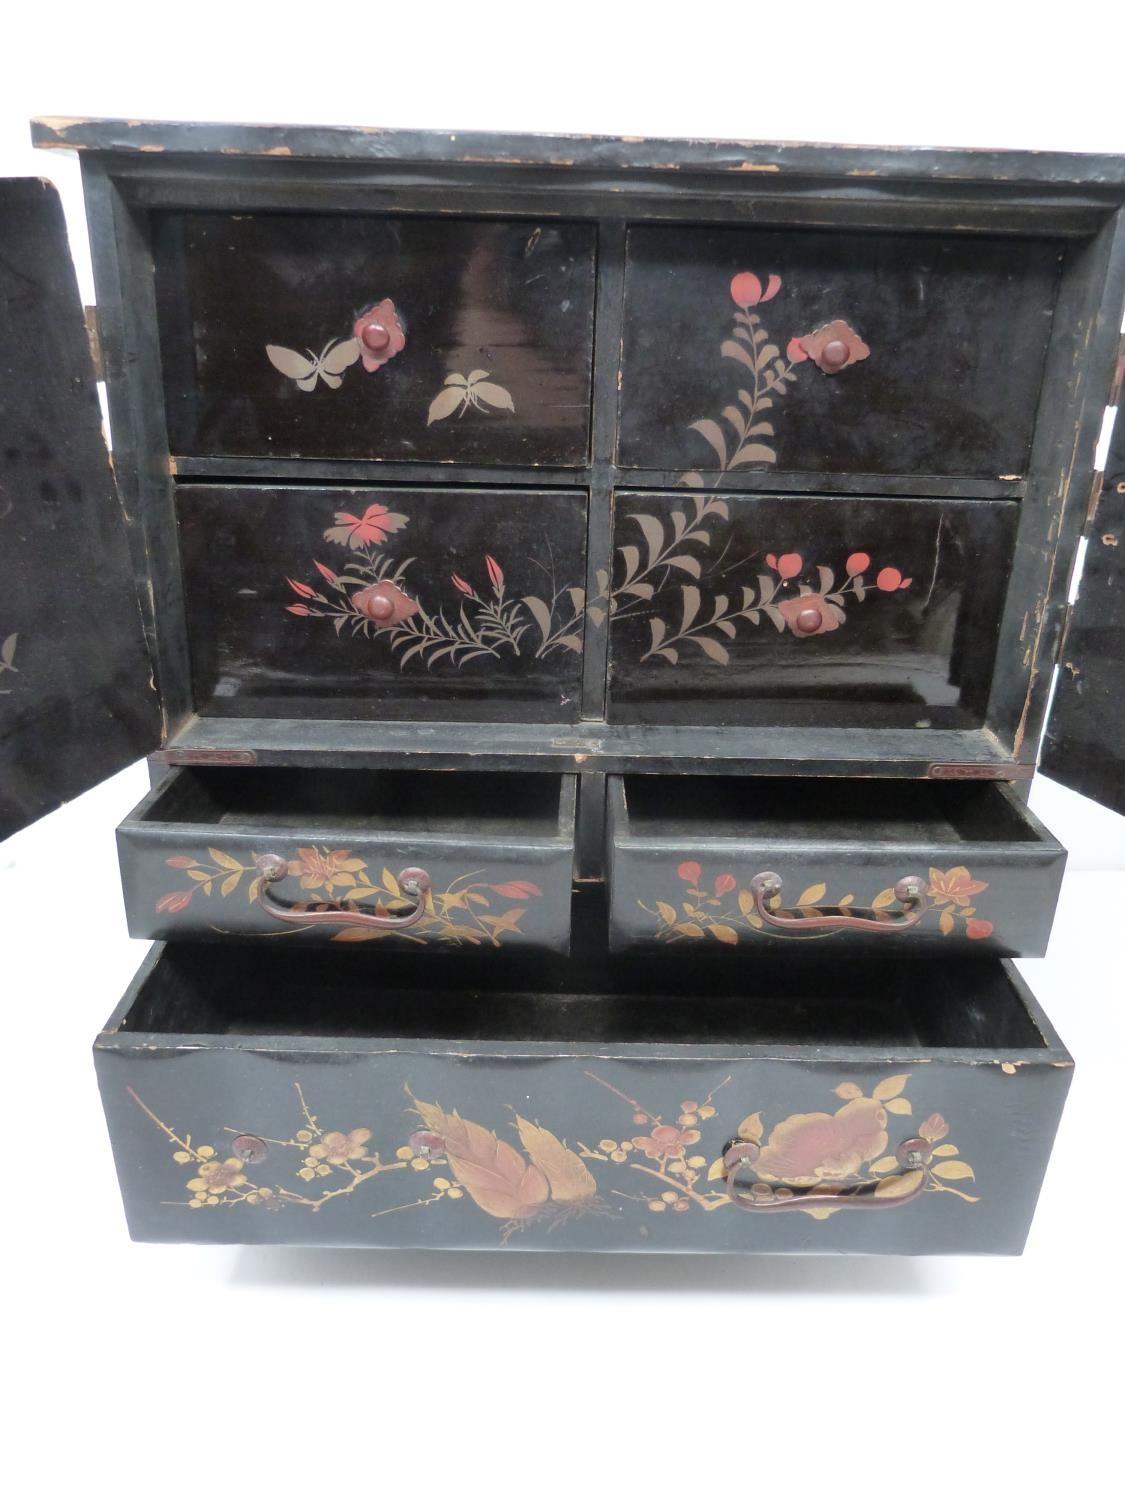 An early 20th century Japanese gilded lacquer table top cabinet with drawers decorated with flower - Image 8 of 24